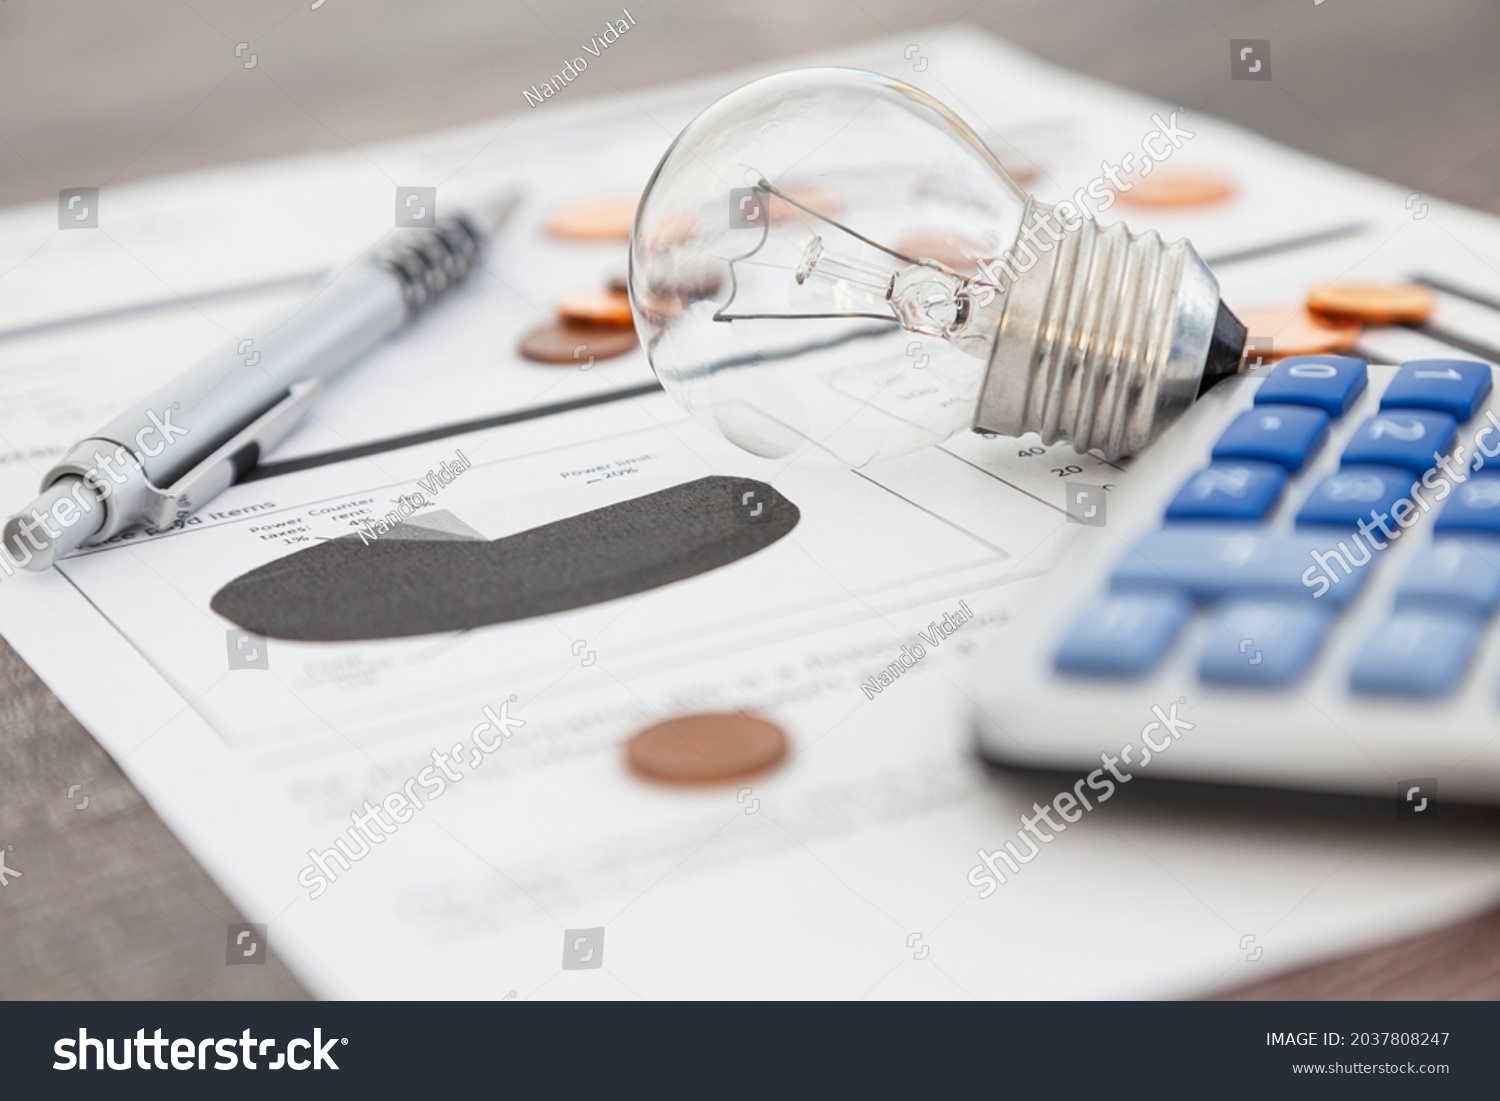 A light bulb, a pen, a calculator and some copper euro cent coins lie on top of an electricity bill. #2037808247